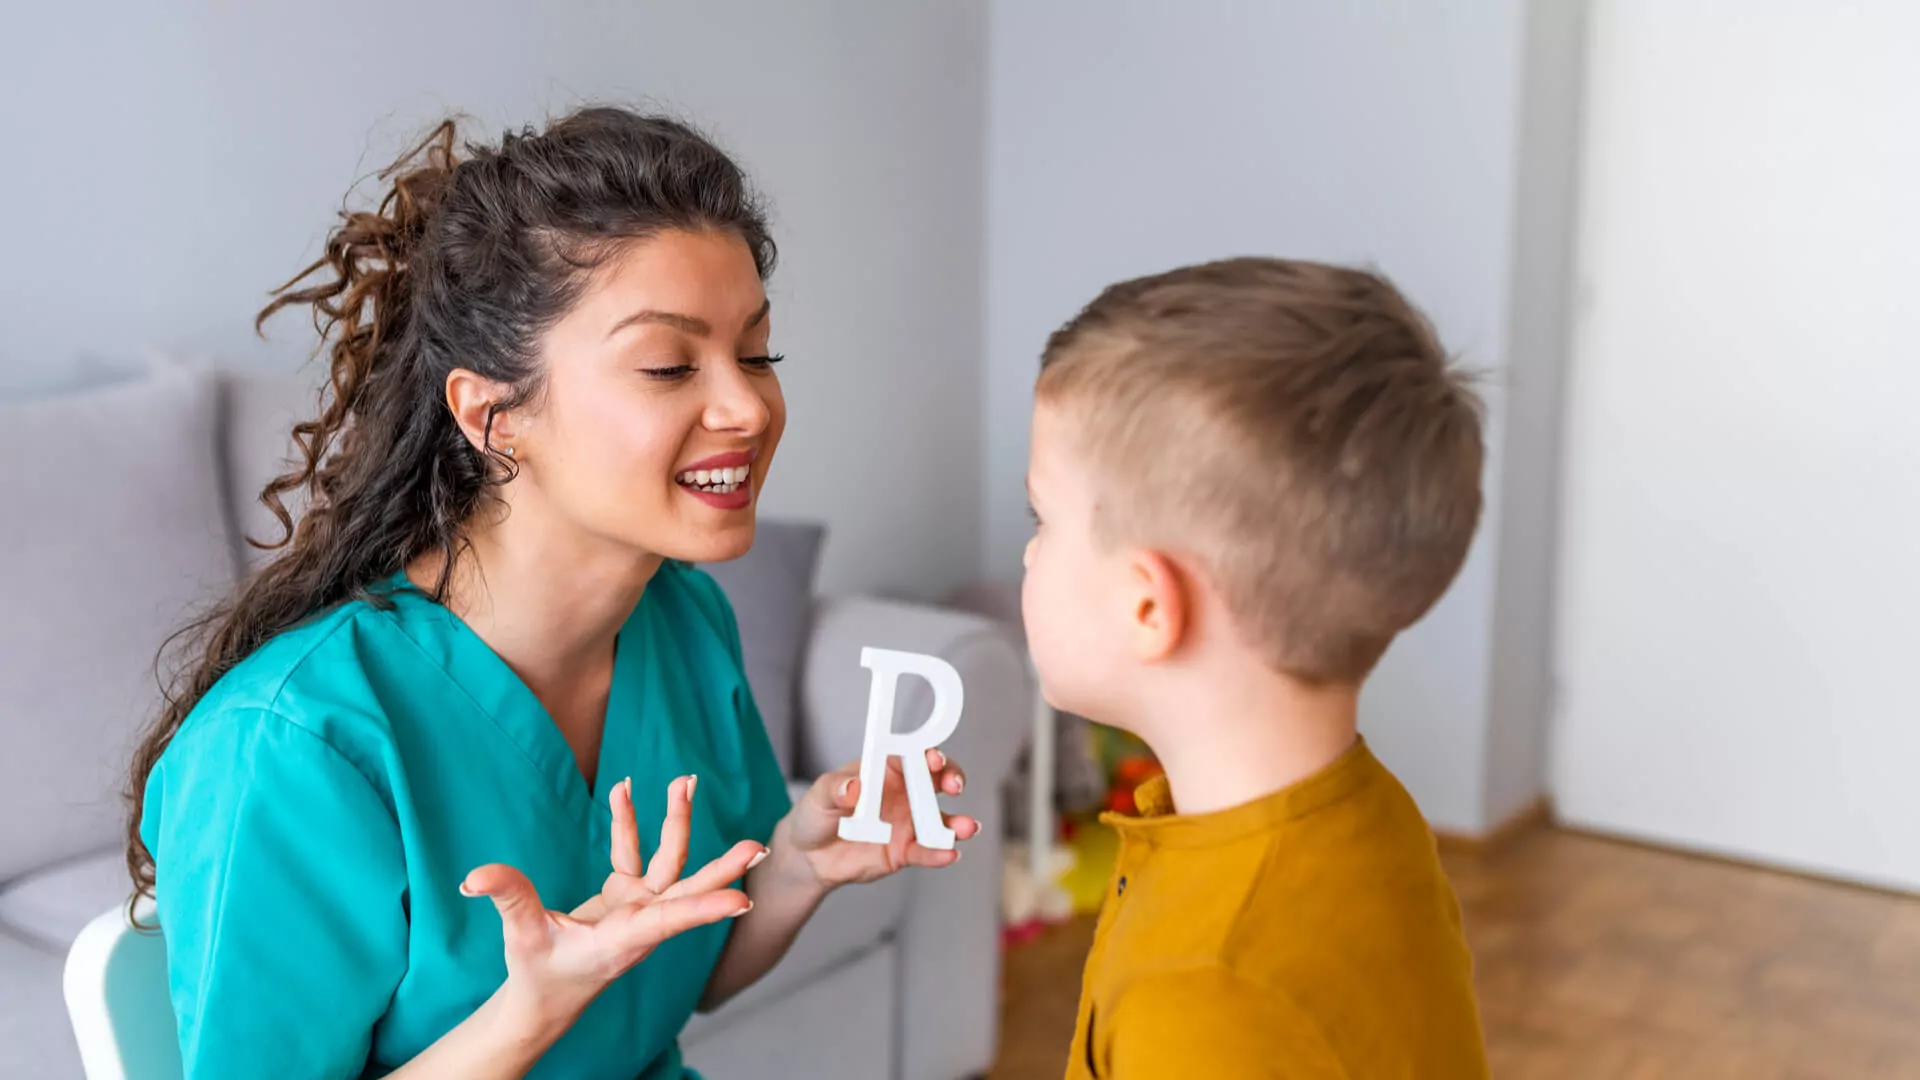 R Articulation Speech Therapy